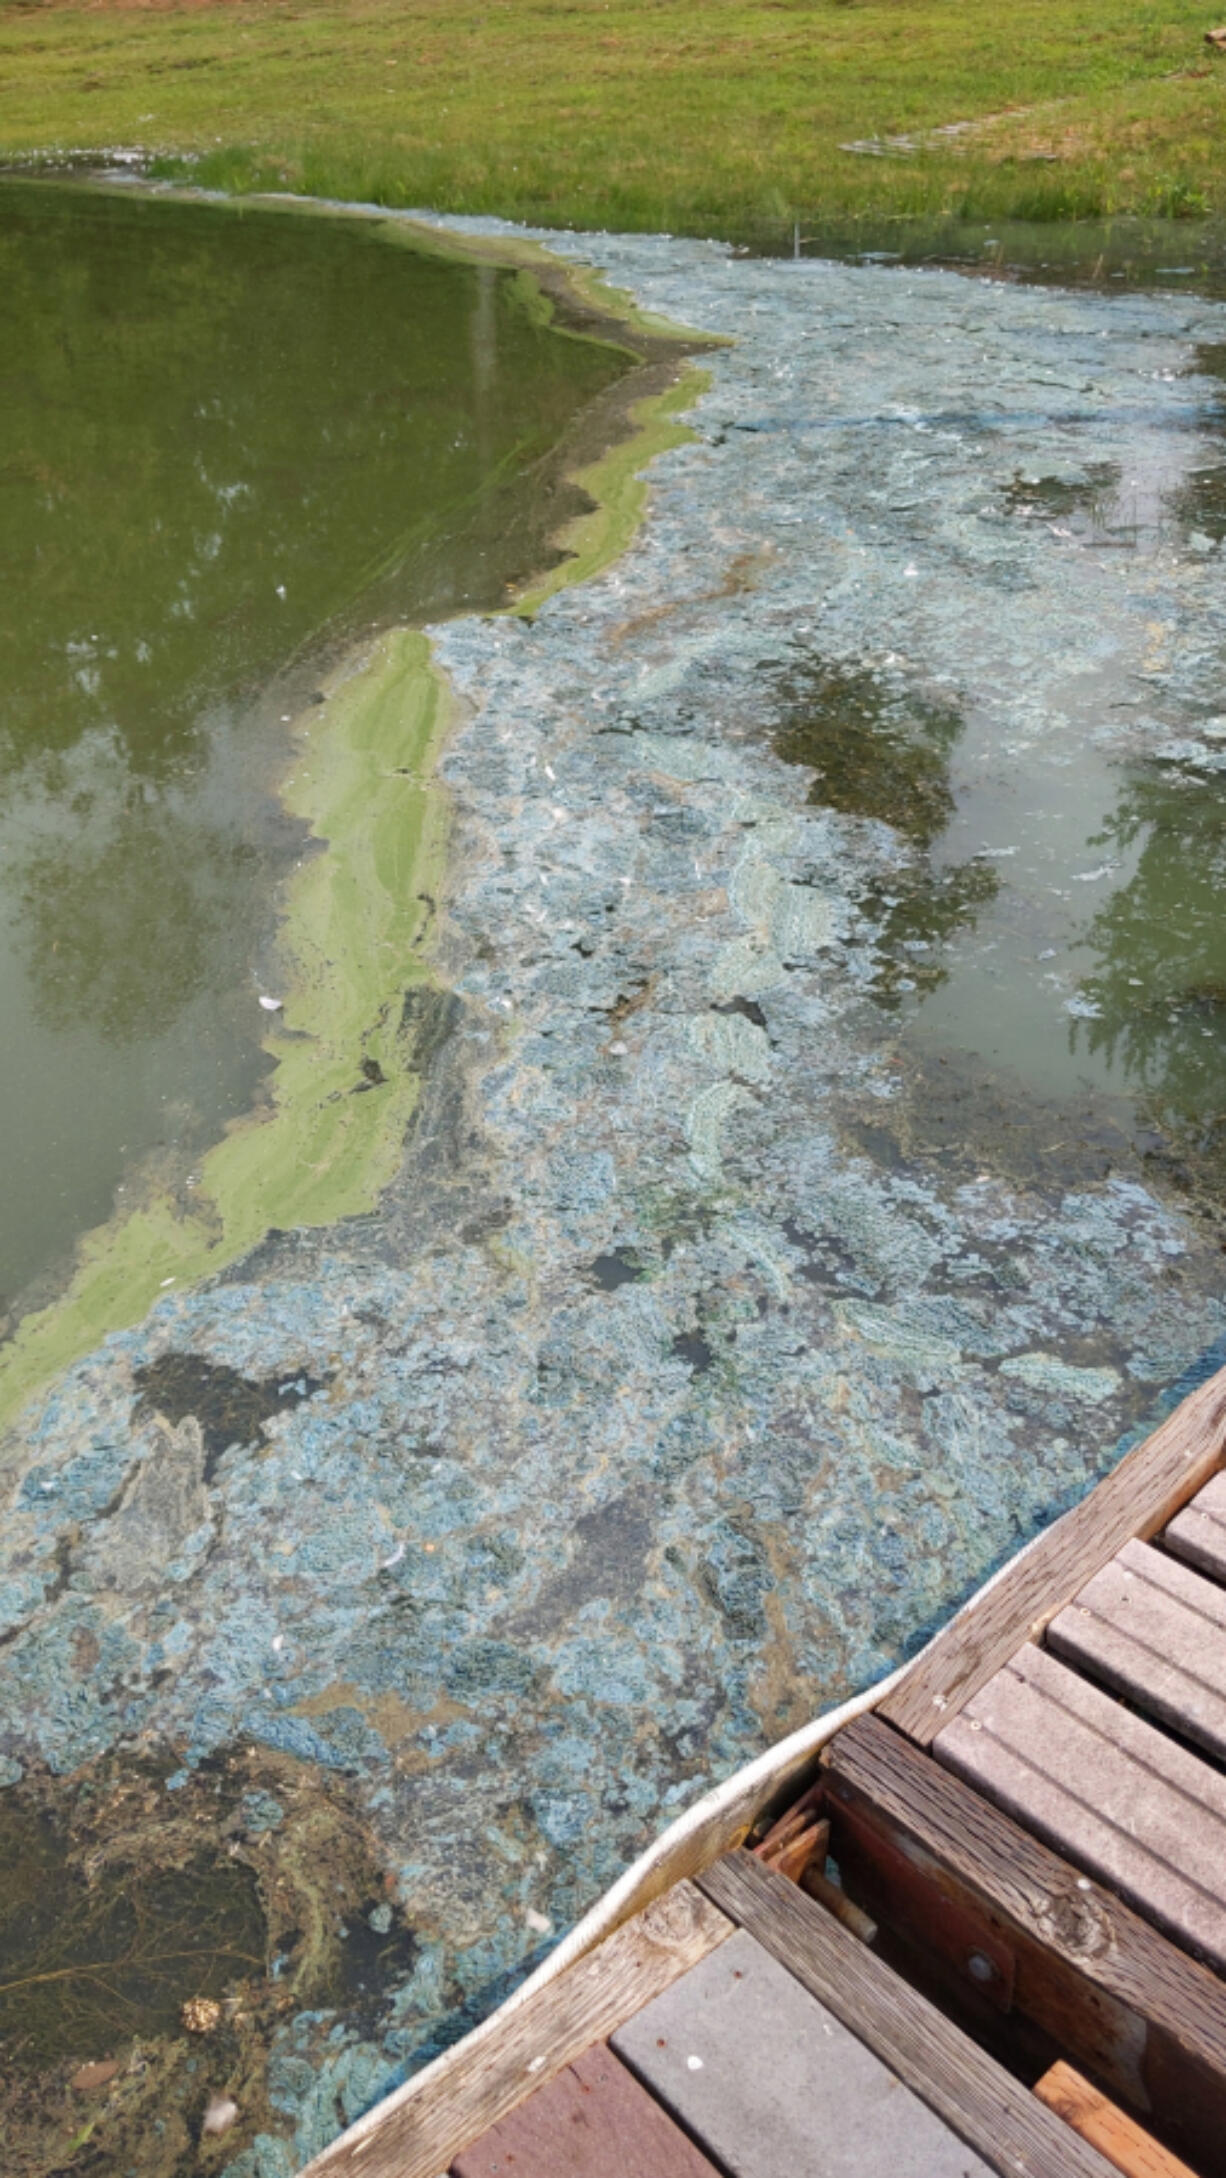 Blue-green algae blooms as seen in 2021 at Vancouver Lake. Toxic algae blooms often force closure of the lake during swimming season.